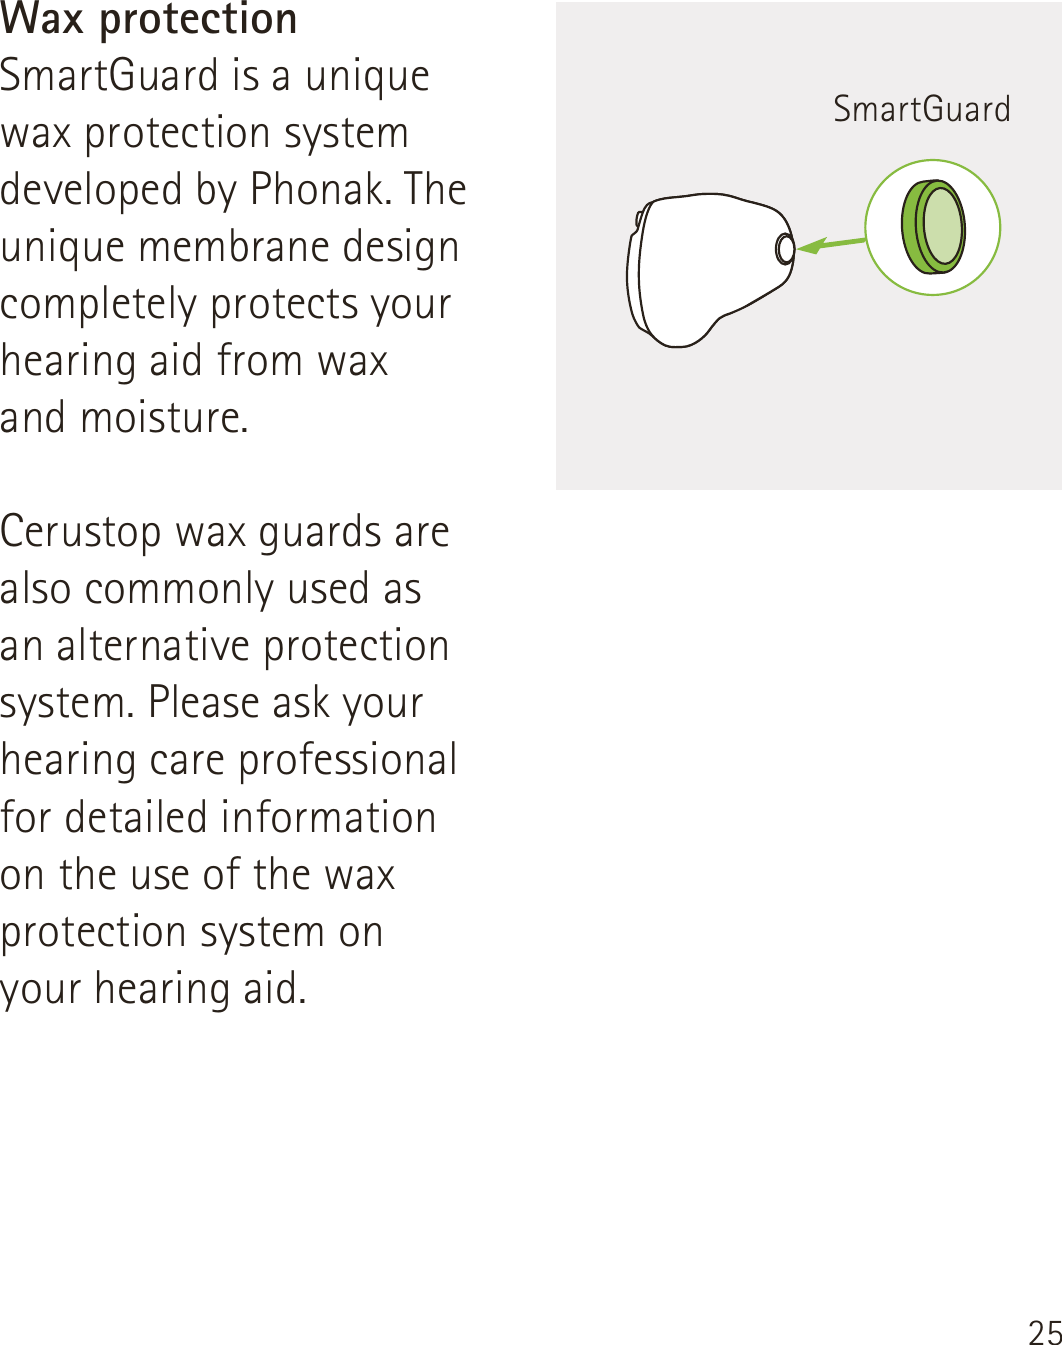 25Wax protectionSmartGuard is a unique wax protection system developed by Phonak. The unique membrane design completely protects your hearing aid from wax  and moisture.Cerustop wax guards are also commonly used as  an alternative protection system. Please ask your hearing care professional for detailed information  on the use of the wax protection system on  your hearing aid.SmartGuard